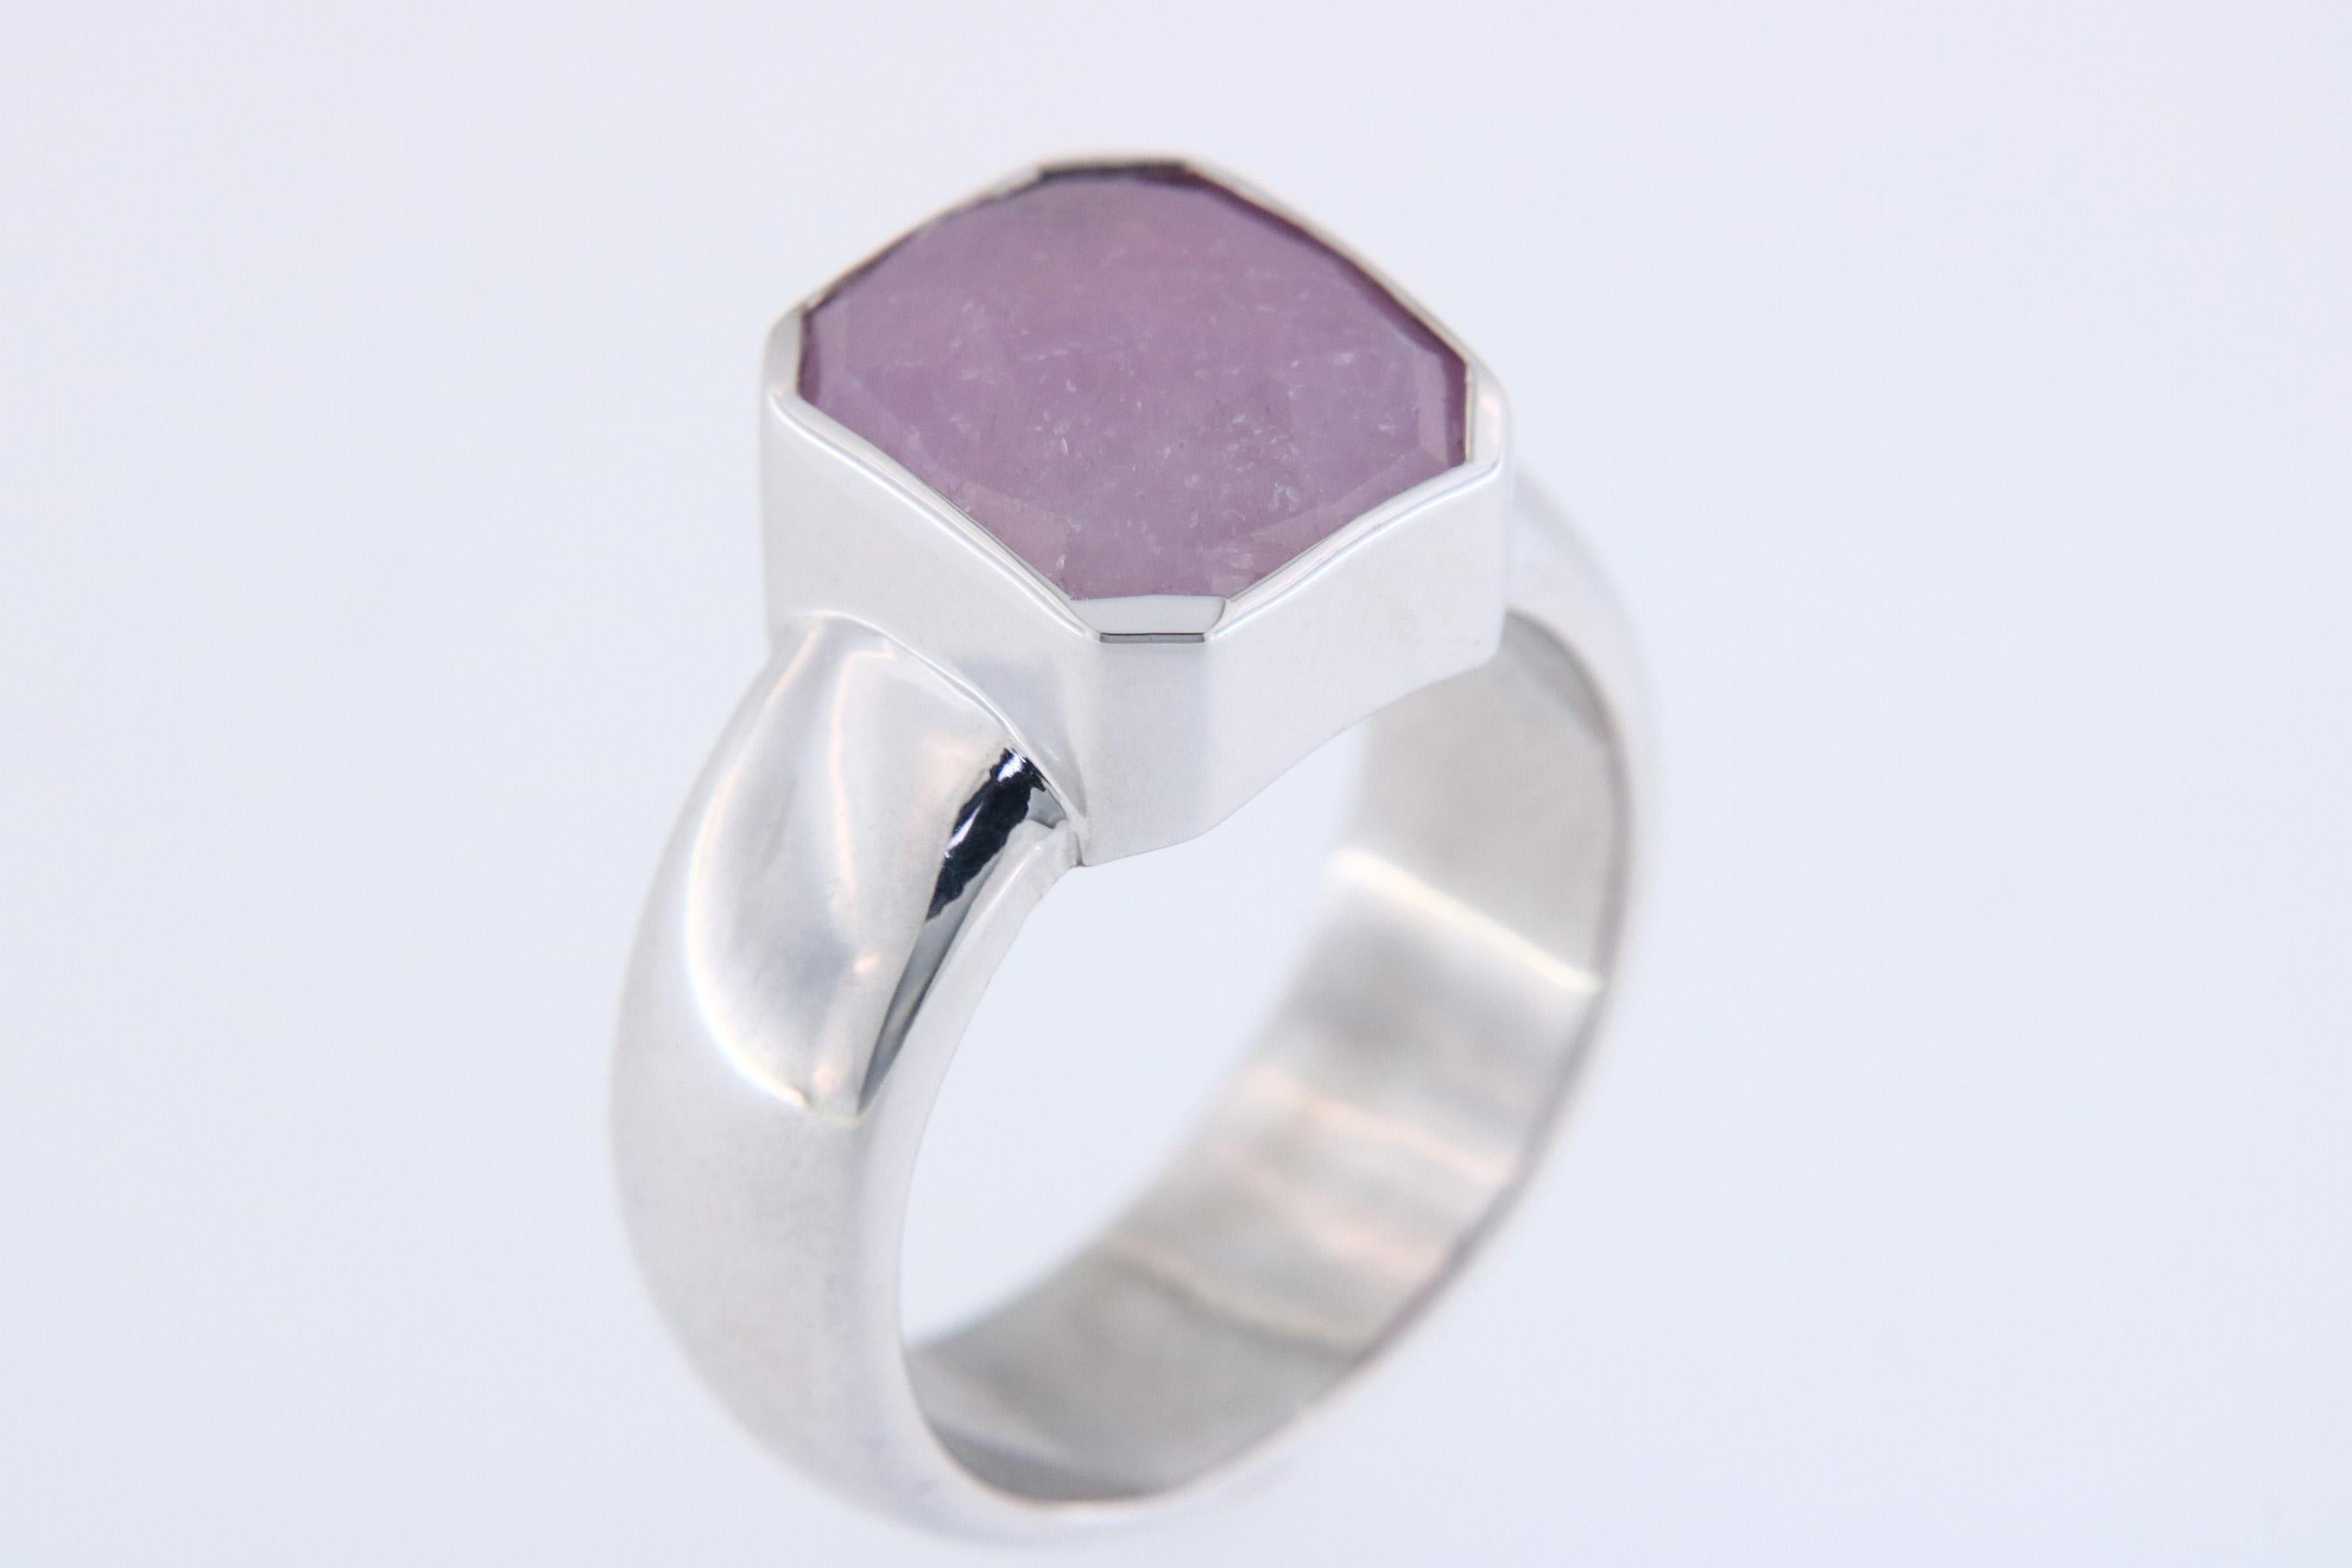 Orloff of Denmark;
This ring showcases a striking 12-carat pink sapphire, cut in a bold hexagonal shape, set atop a band of polished 925 sterling silver. The soft hue of the pink sapphire offers a touch of feminine grace, while the geometric cut